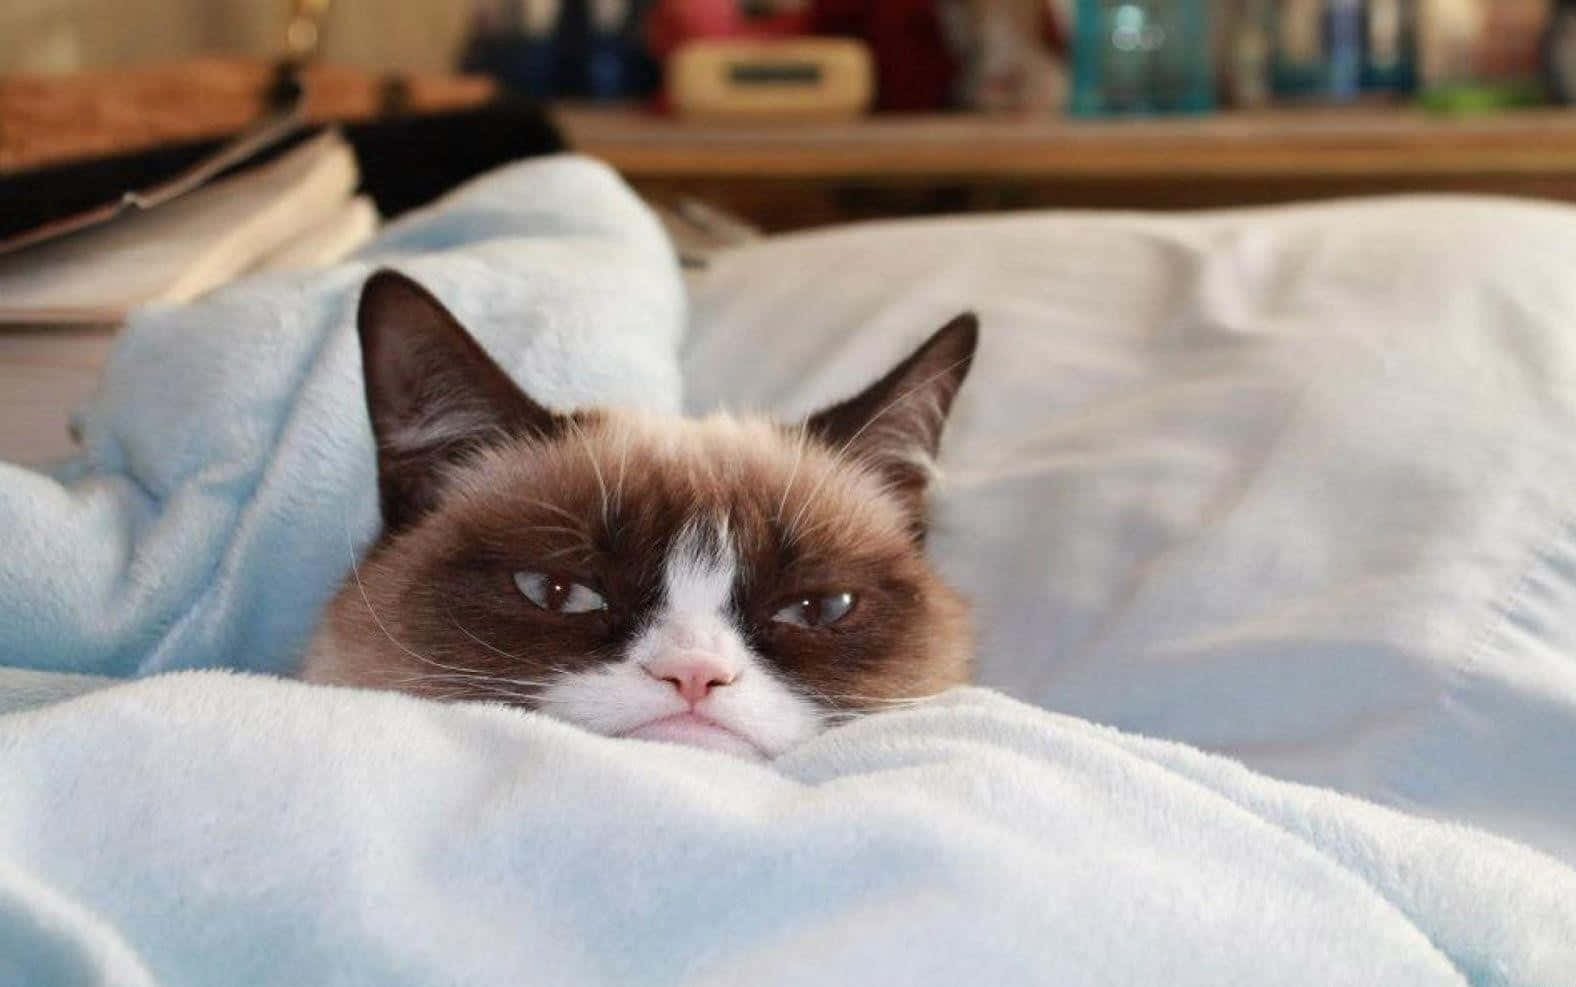 Meet Grumpy Cat, the official mascot of all things gloomy.